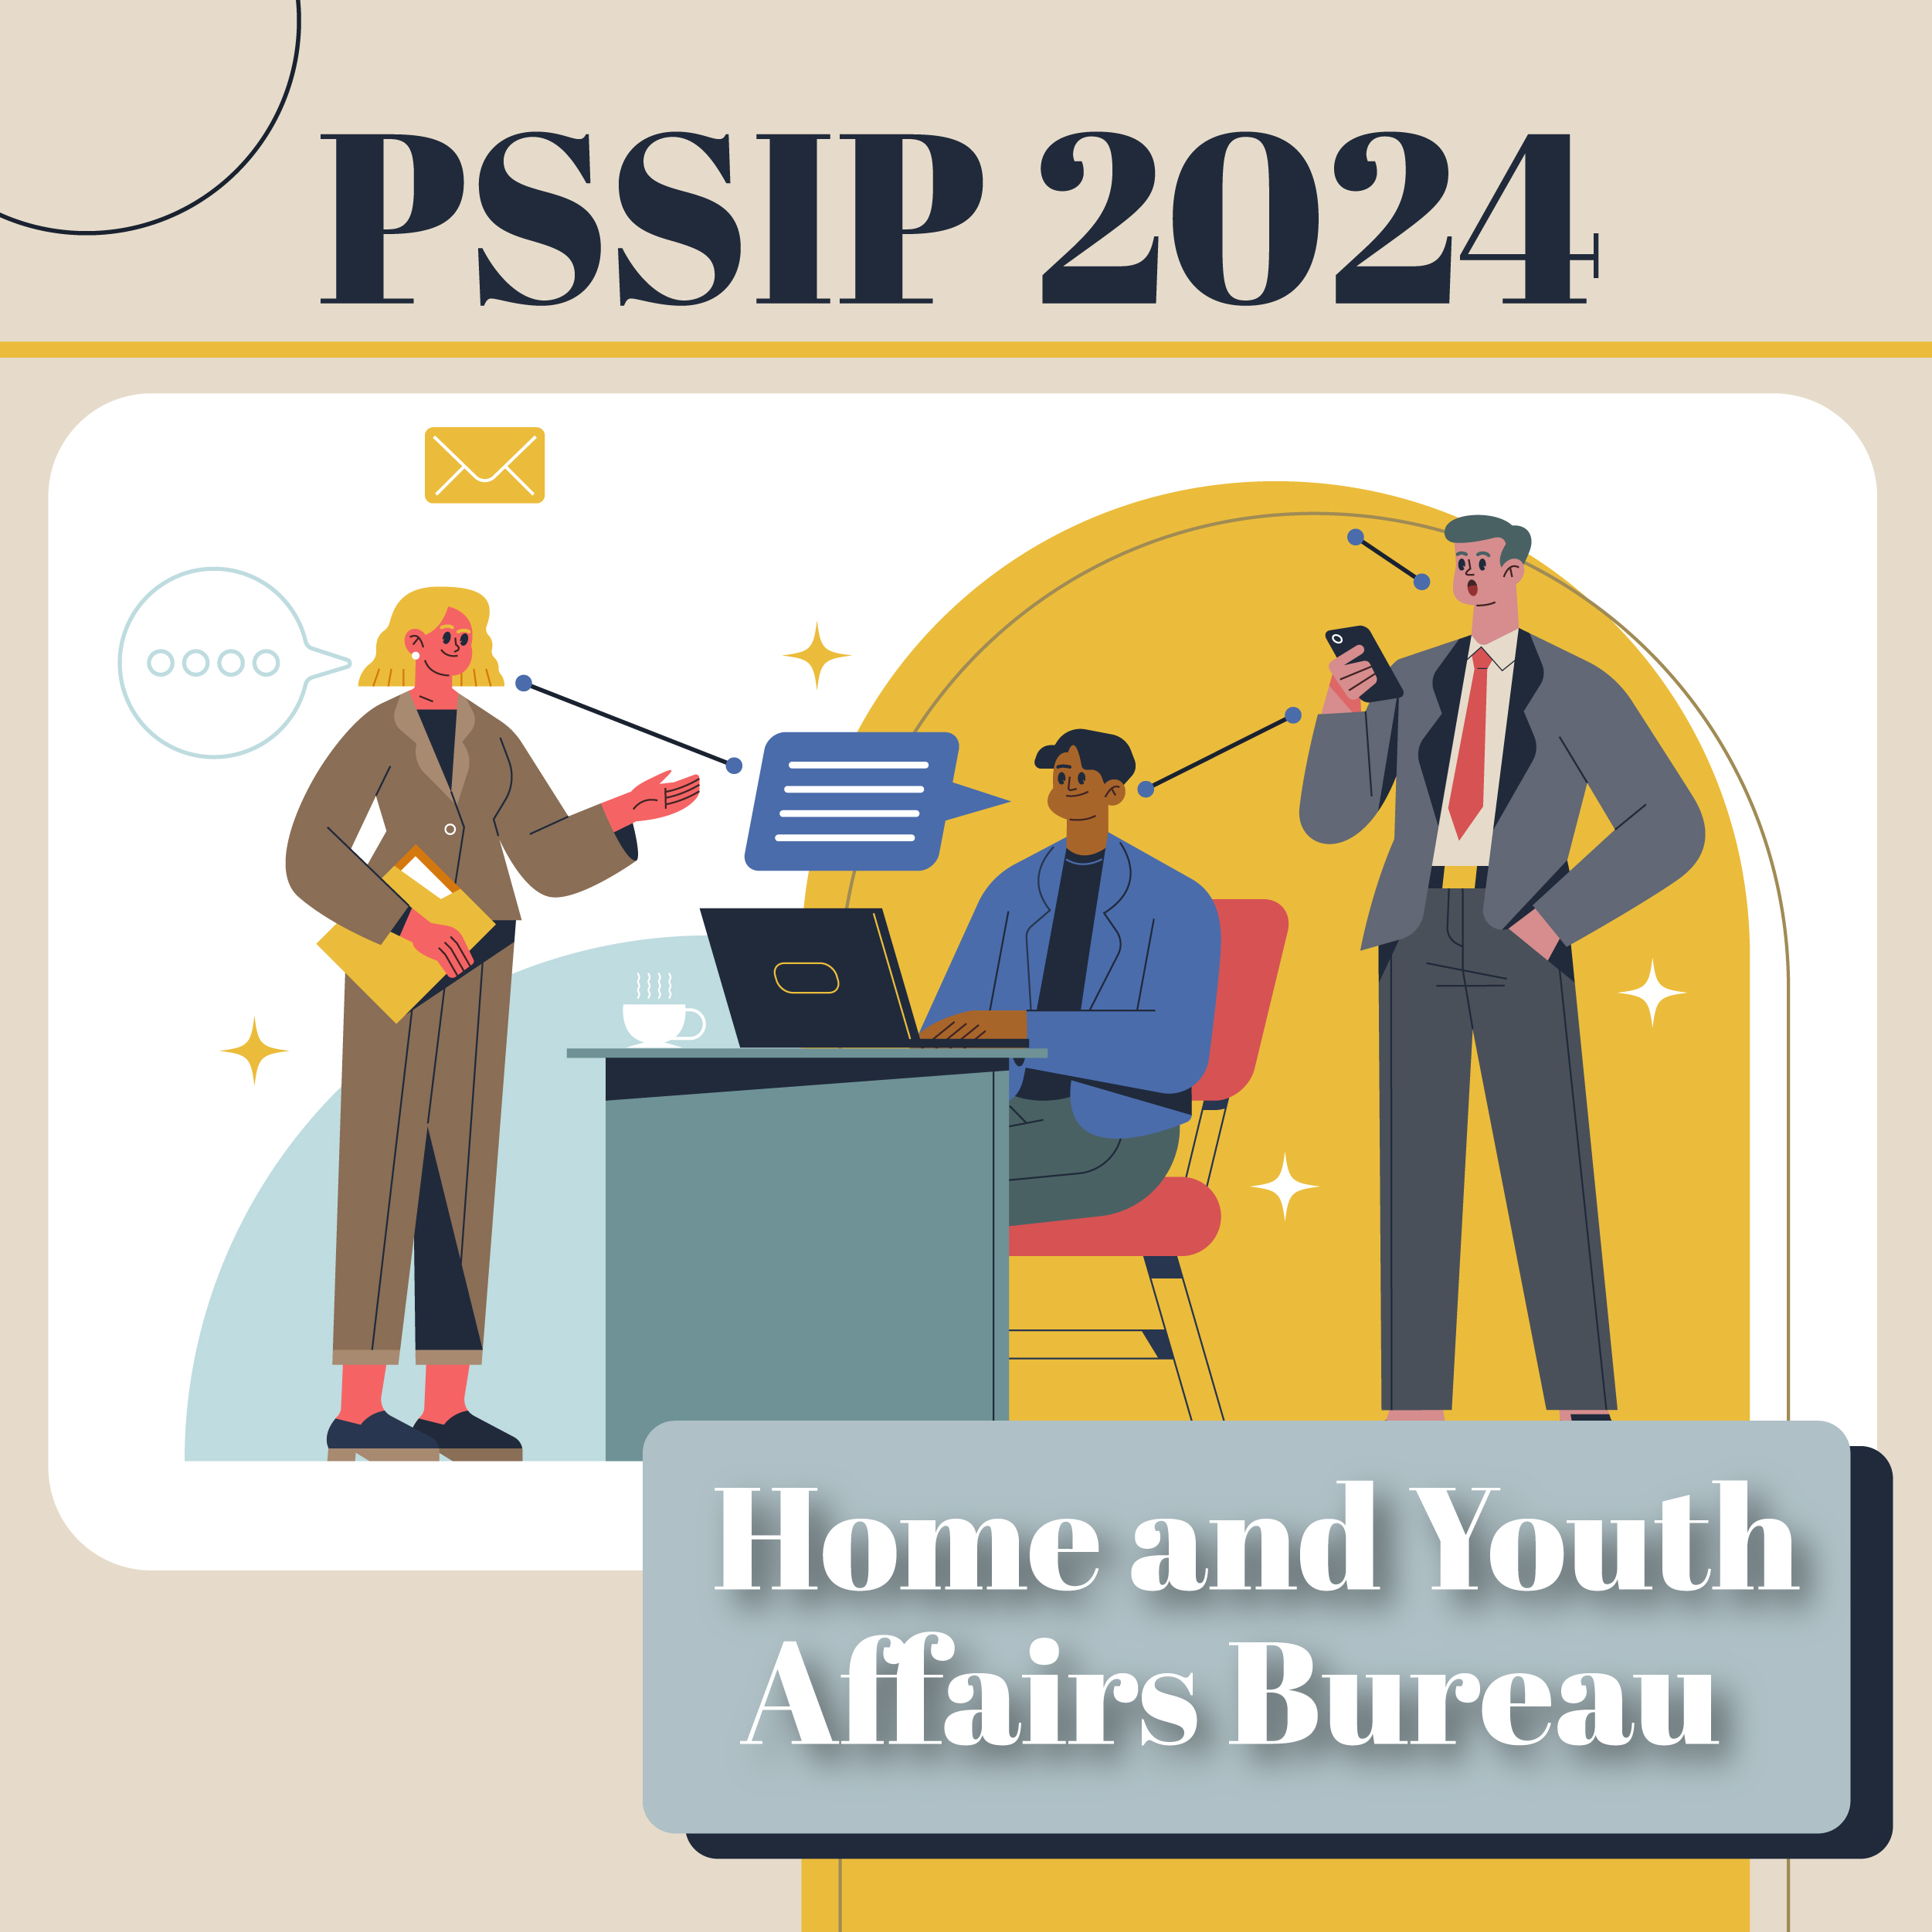 PSSIP2024 – Home and Youth Affairs Bureau (Youth Affairs Division 2)